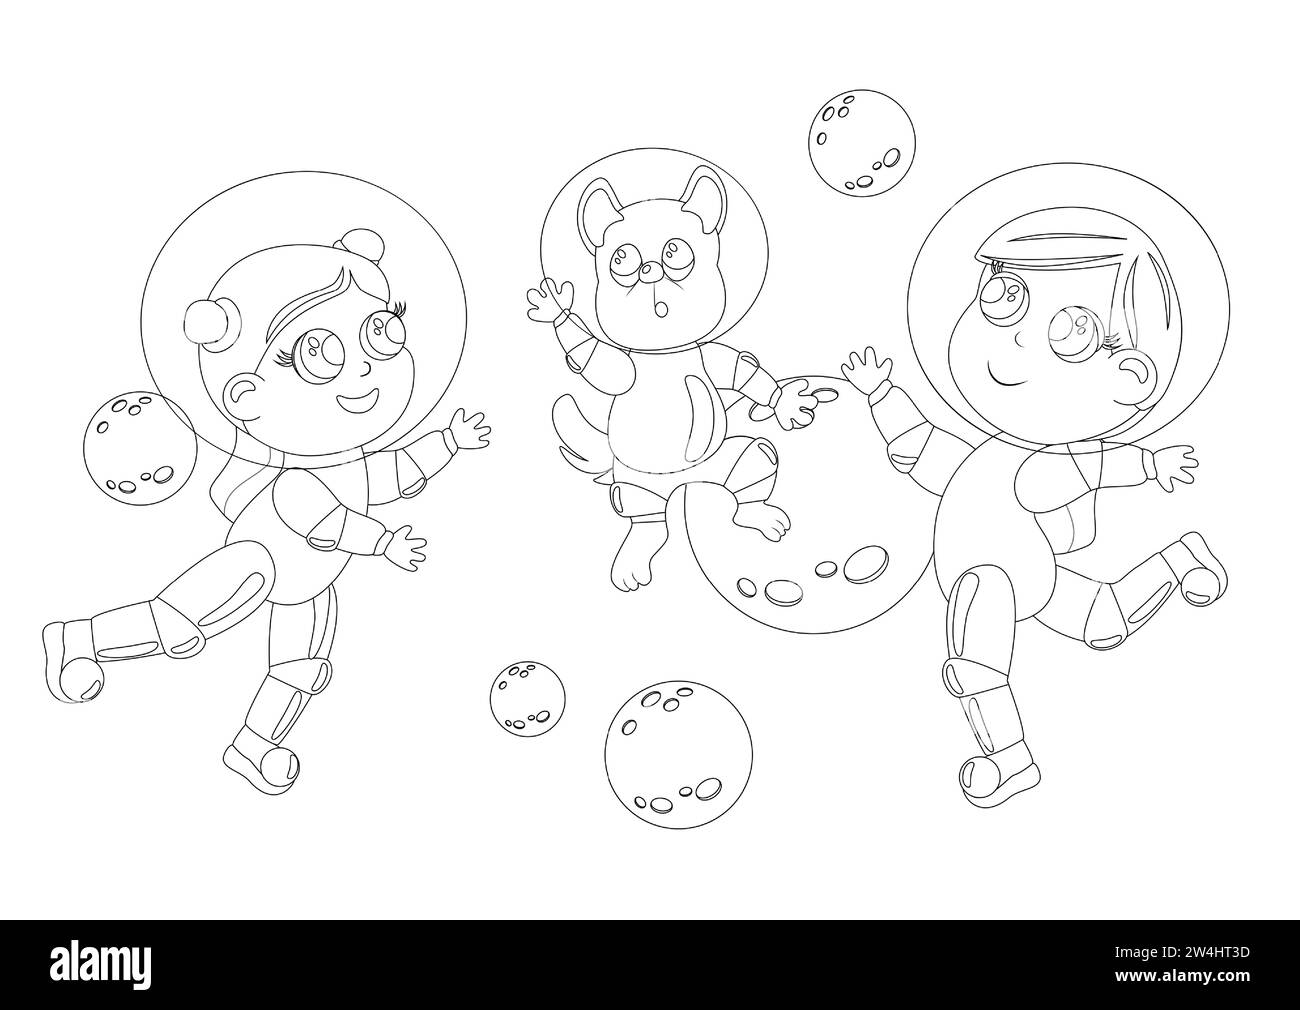 Coloring page. Two girls with big eyes and a dog are dressed in an astronaut suit and a helmet. Children are happy and fly in outer space. Cartoon sty Stock Vector